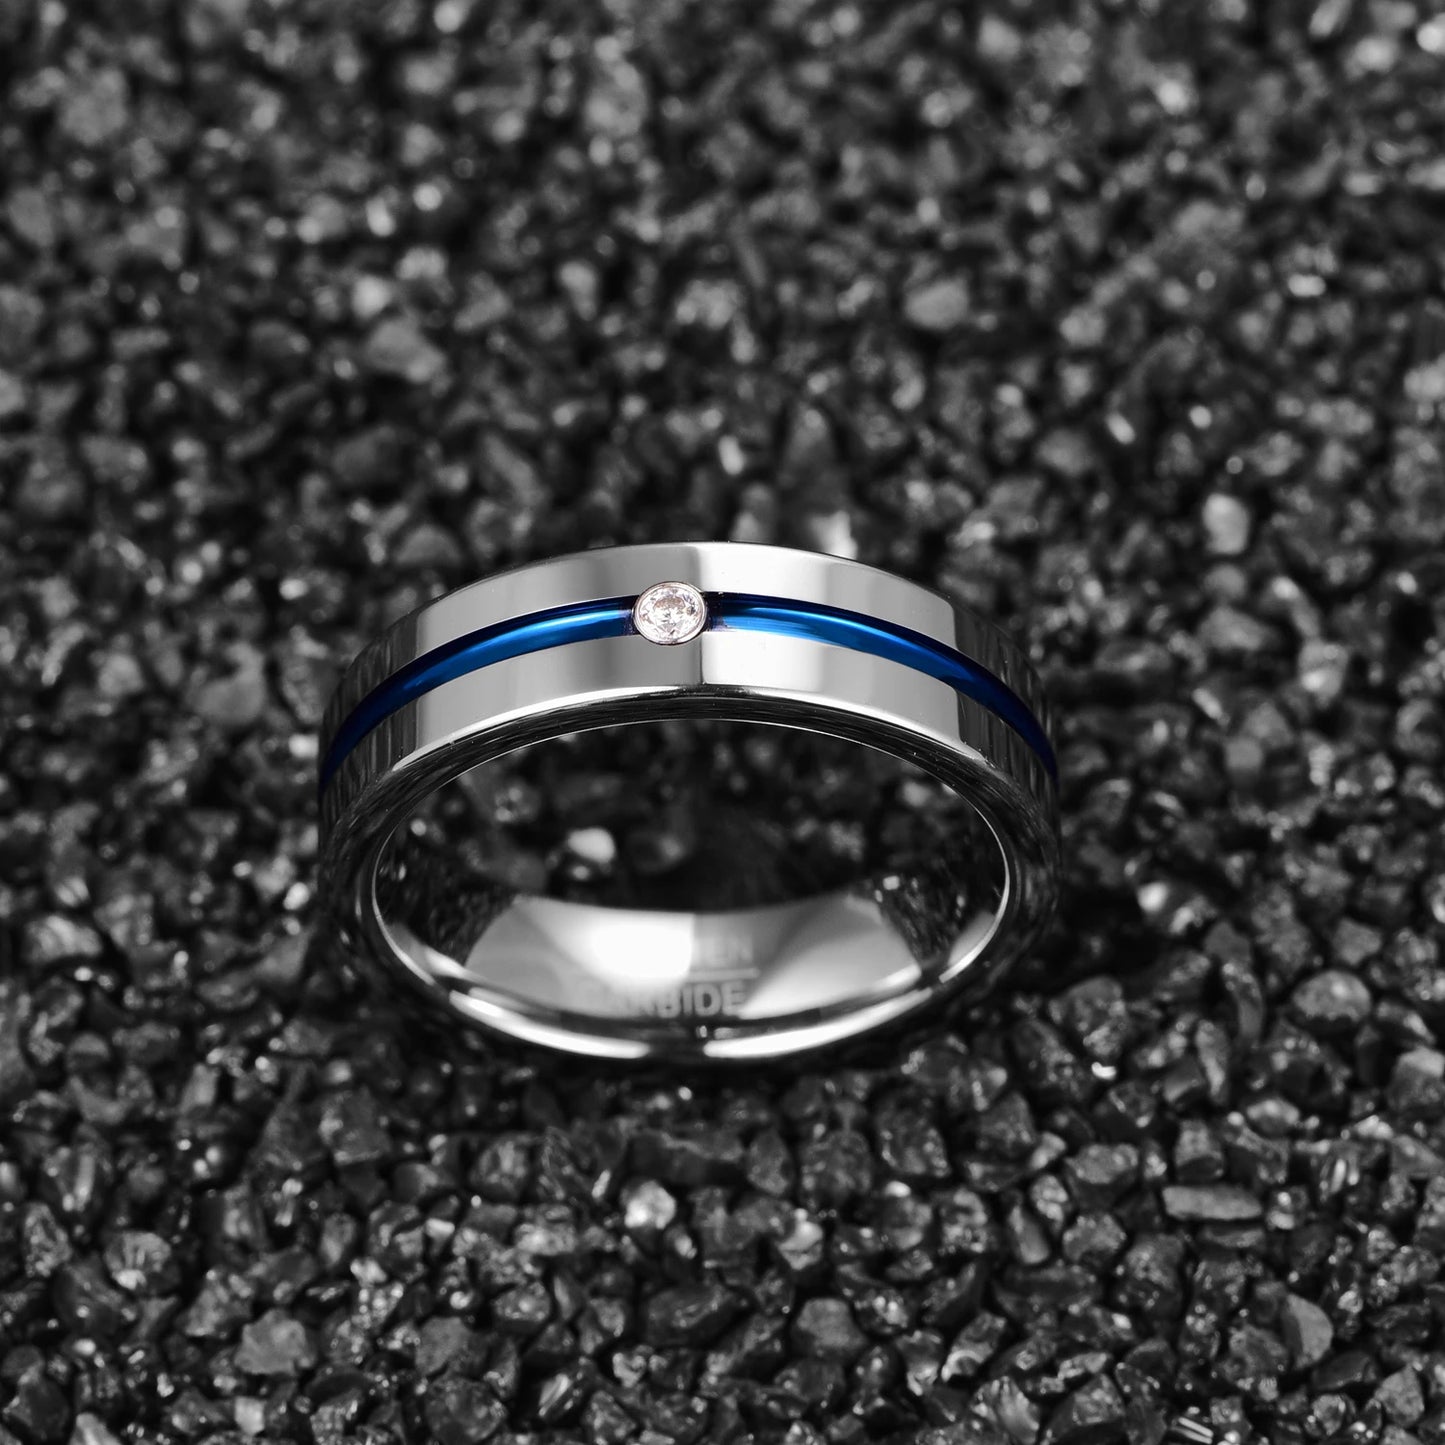 6mm Blue Groove Inlaid & Cubic Zirconia Silver Tungsten Men's Ring